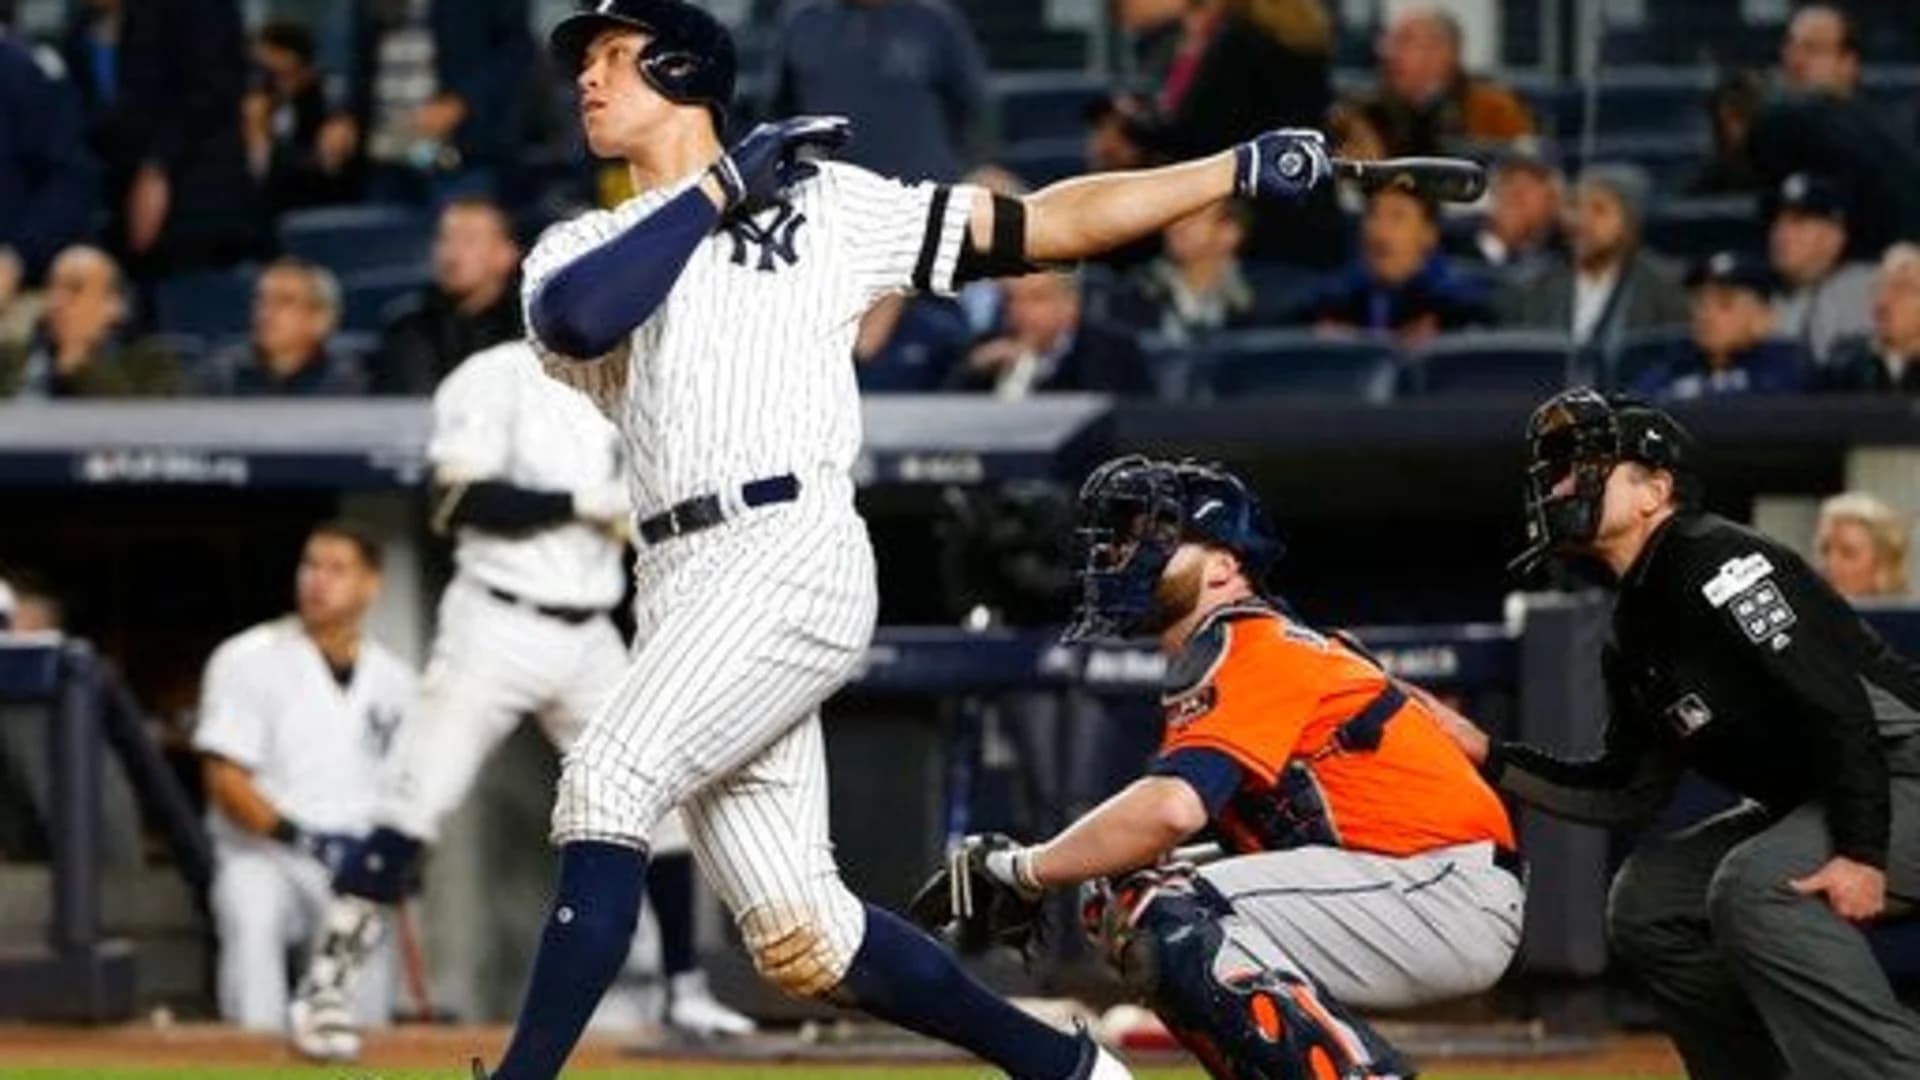 Judge HR sparks NY, Yanks beat Astros 6-4 to even ALCS at 2